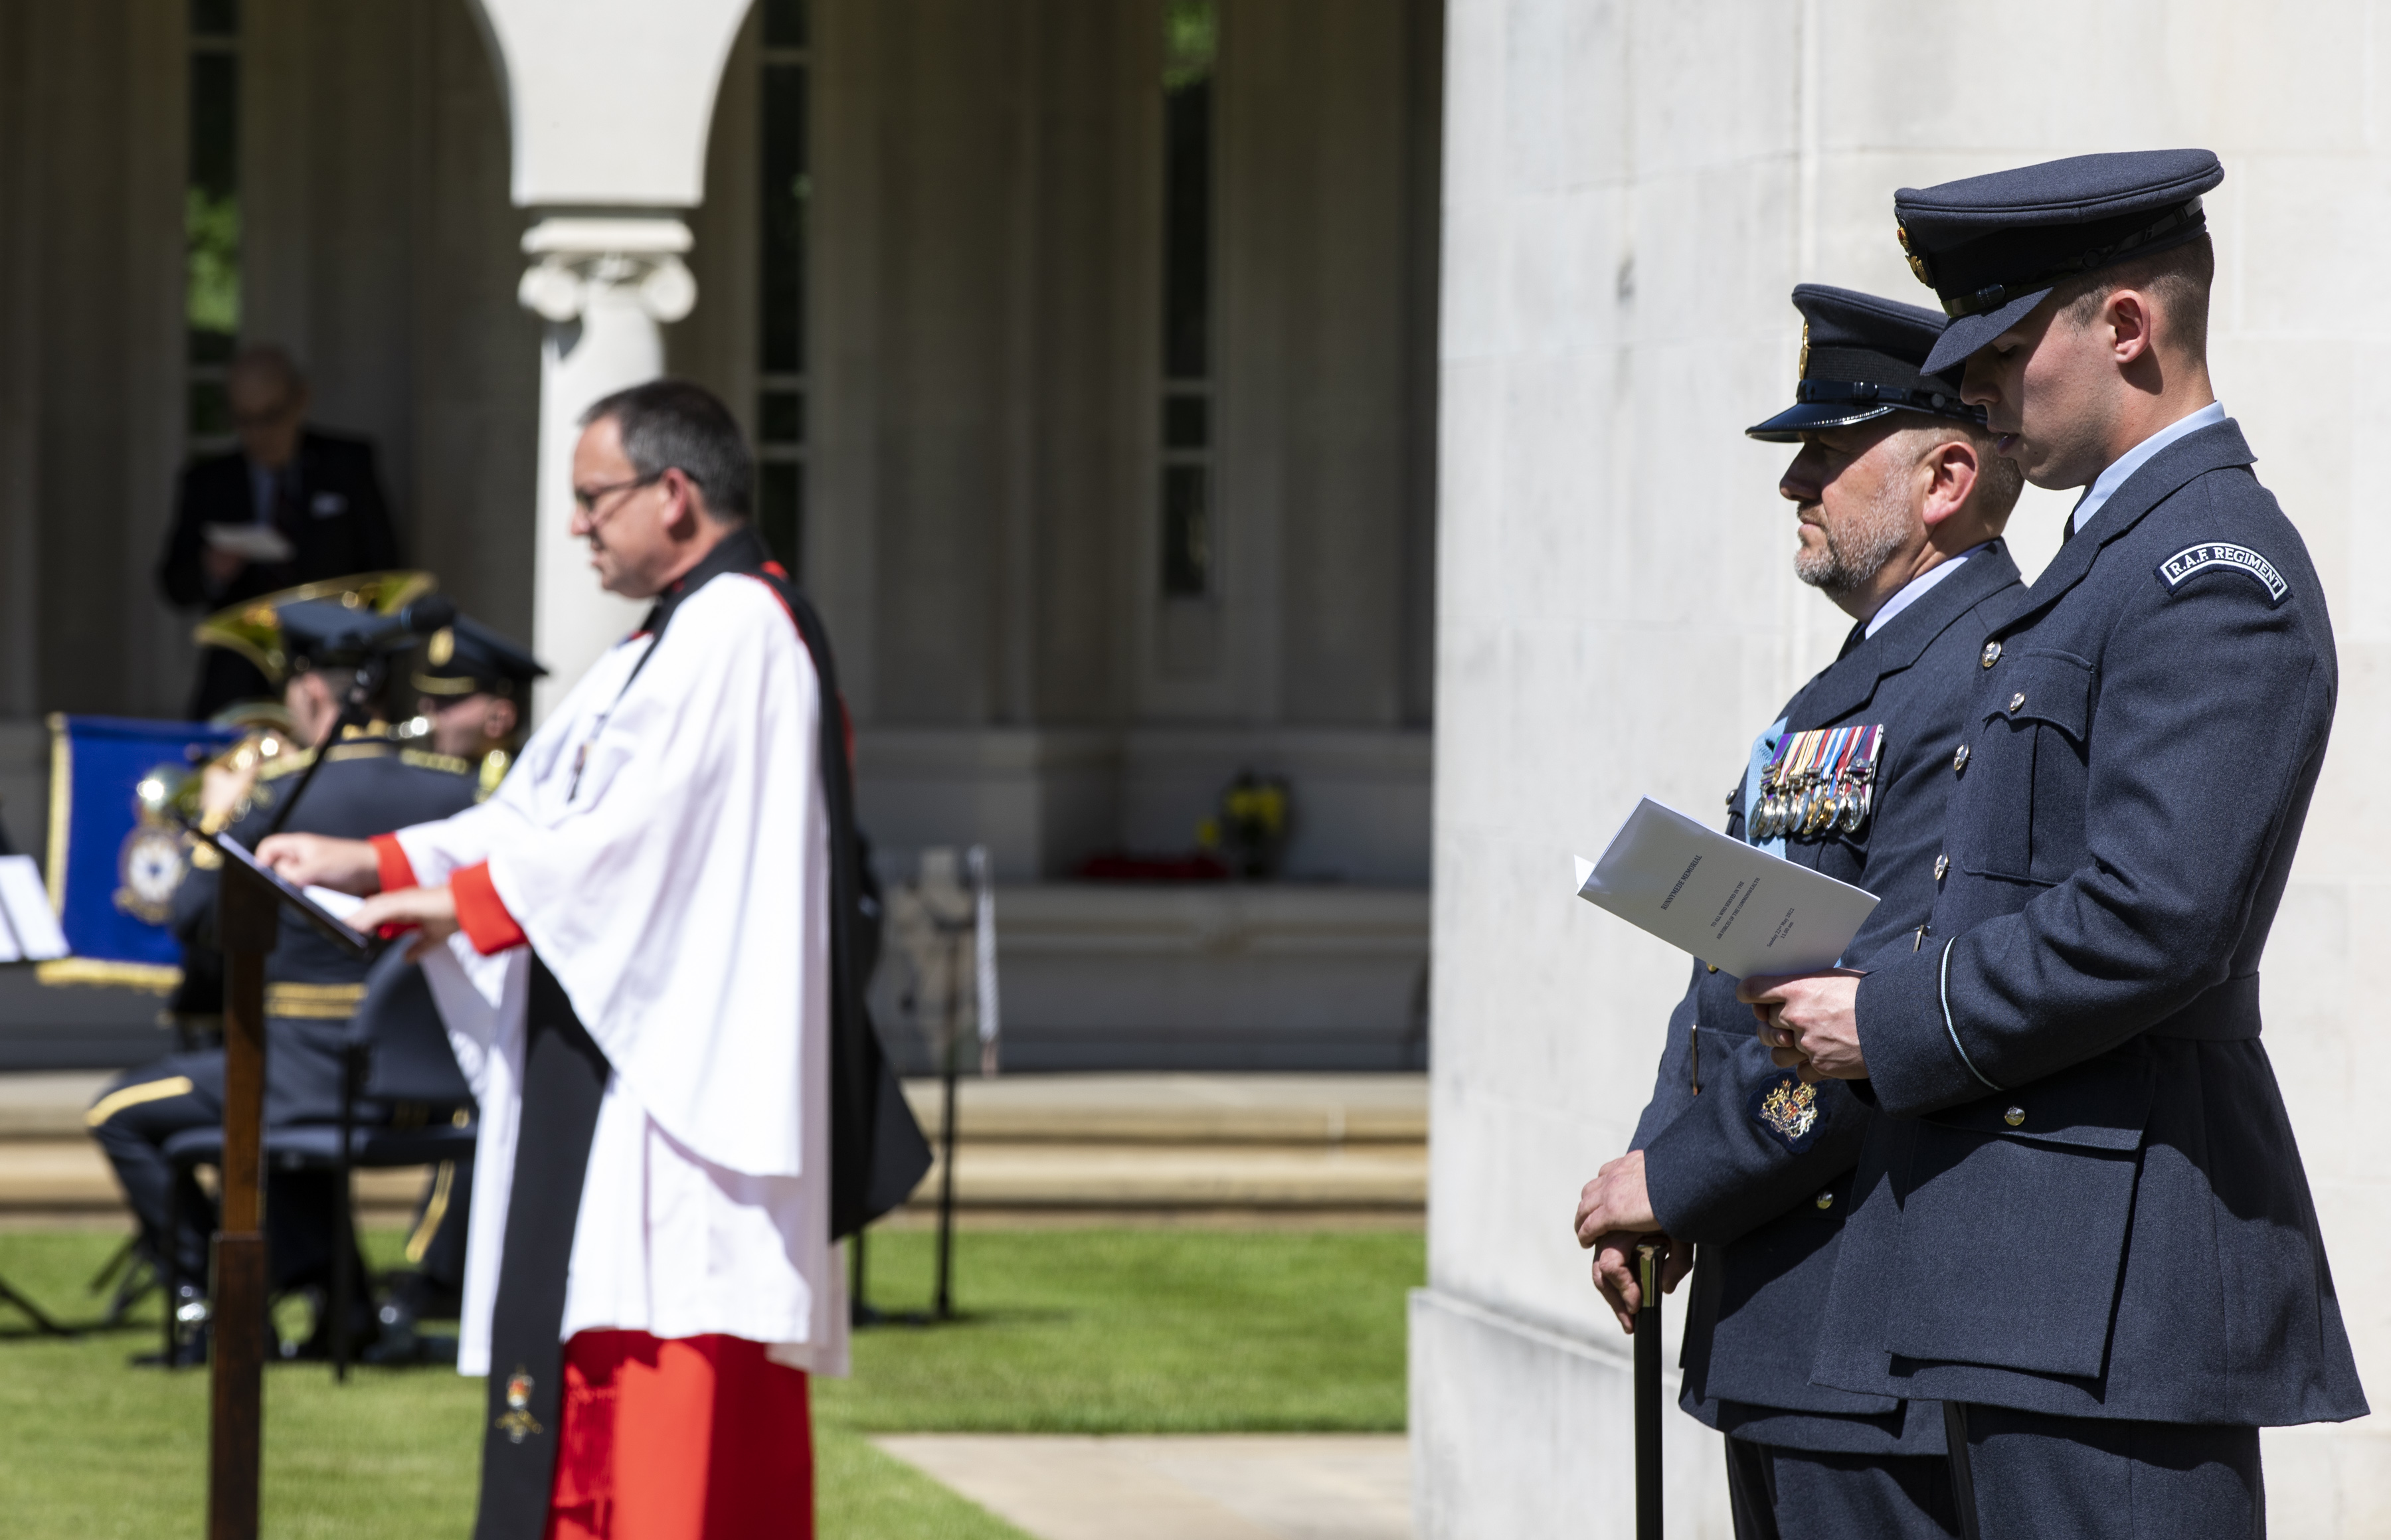 Personnel and chaplain by memorial.